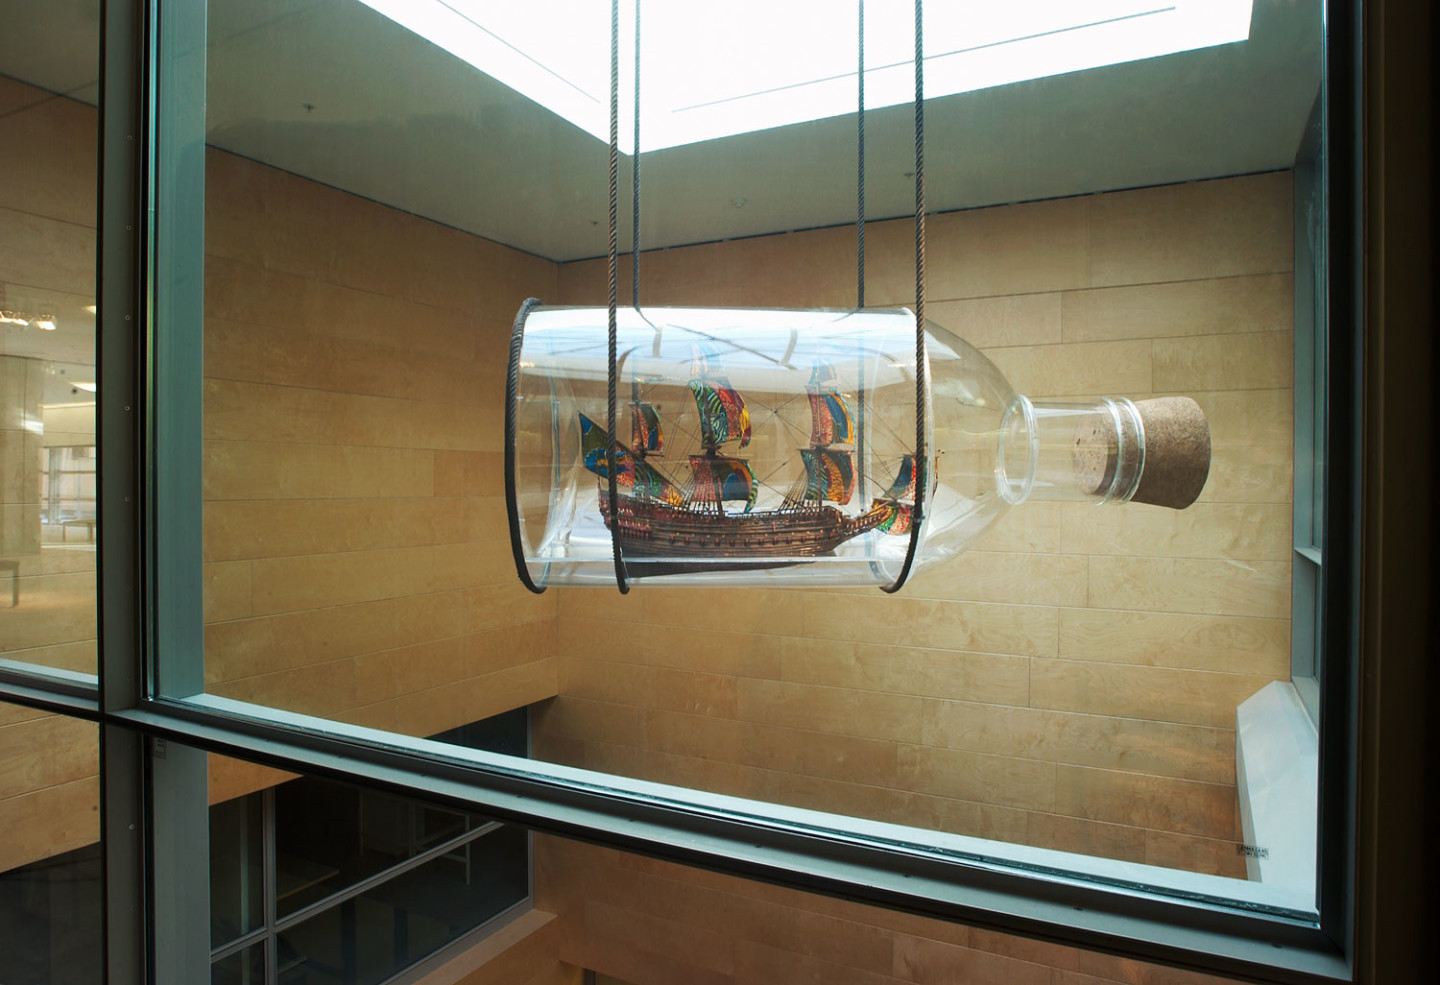 The ship Vasa in a large glass bottle that hangs in the museum's foyer